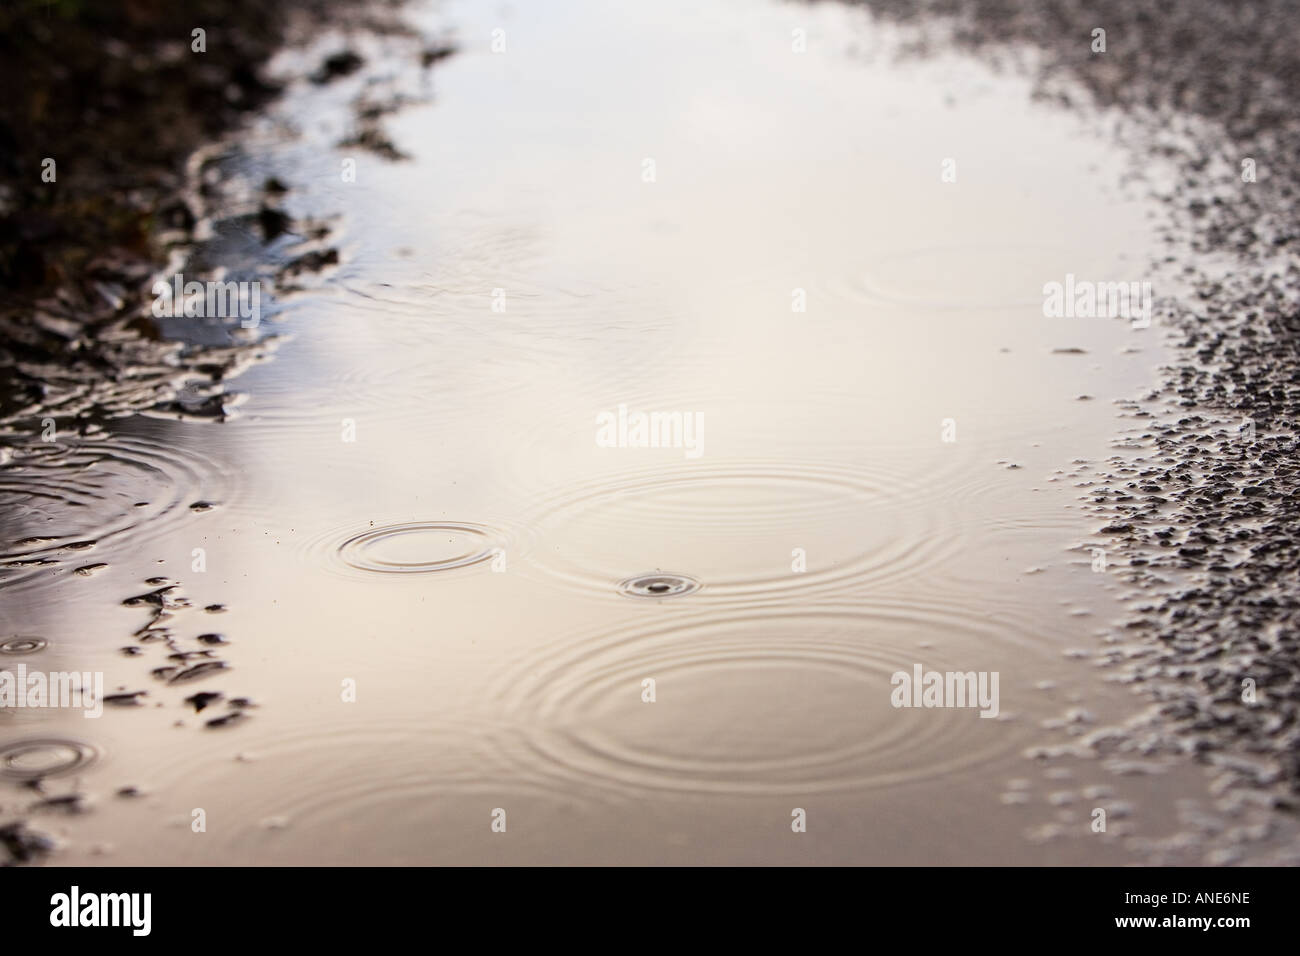 Ripples in a rainwater puddle Oxfordshire United Kingdom Stock Photo